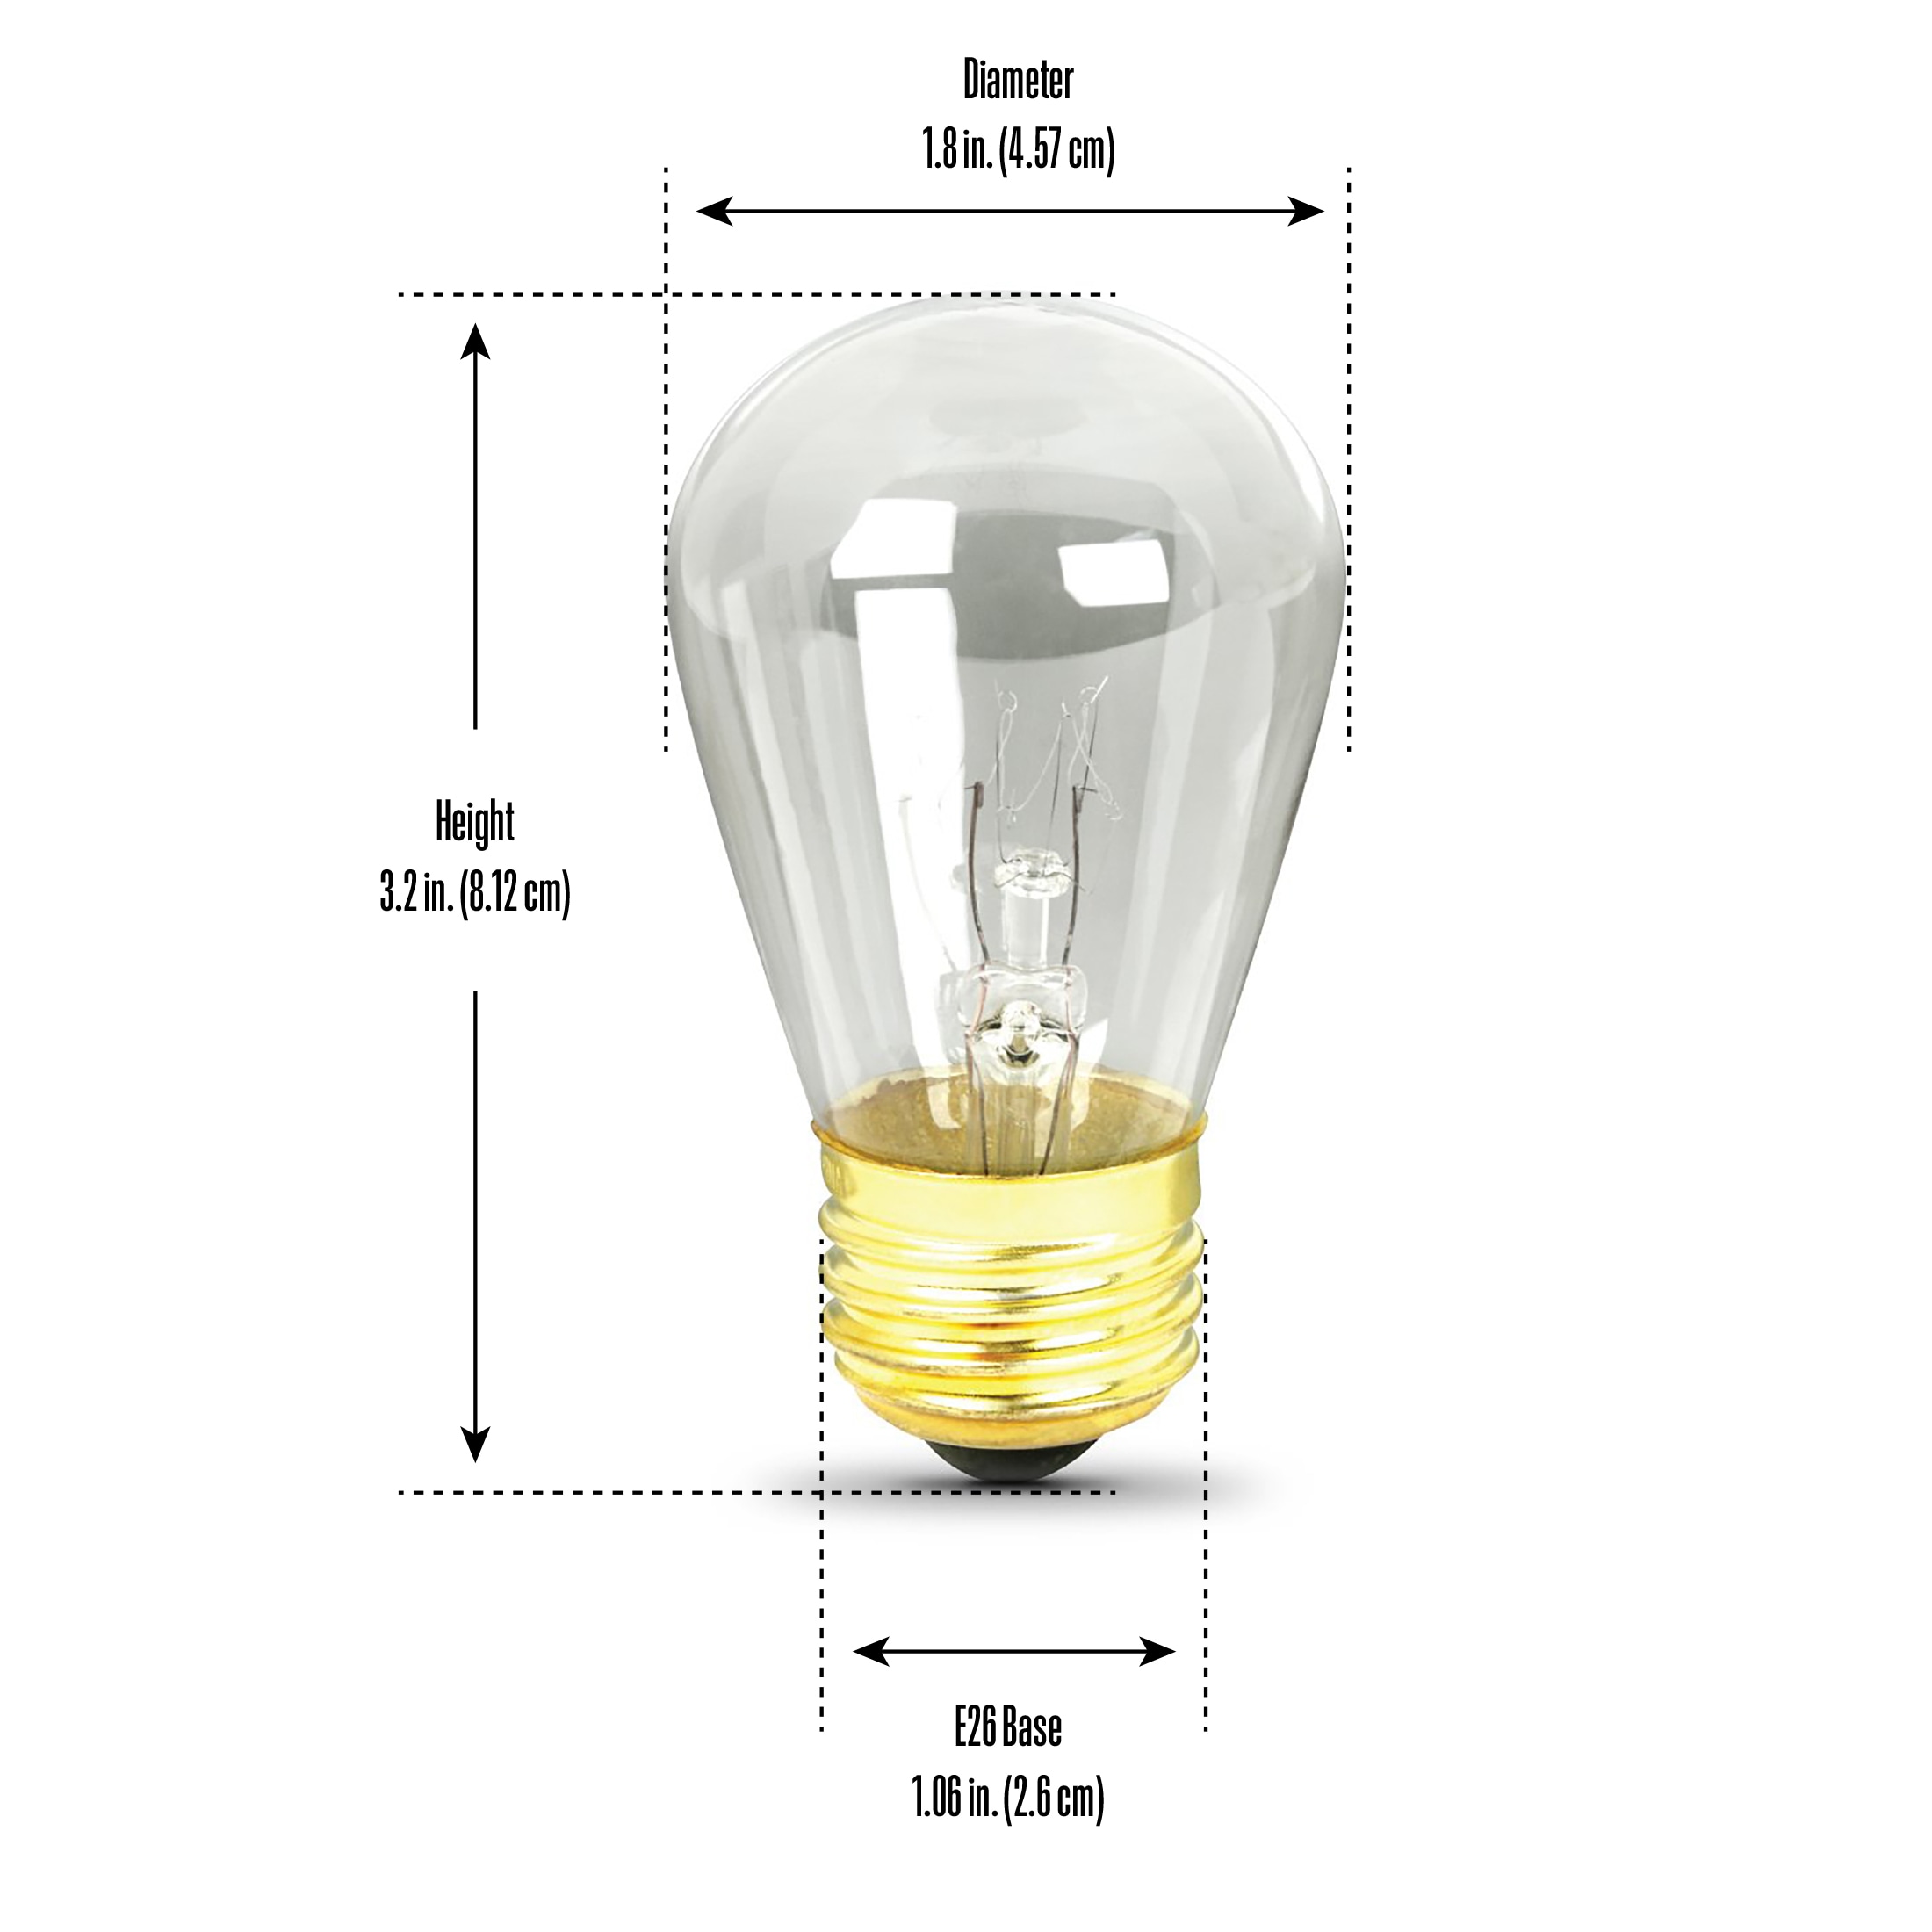 Philips Smart LED 8W E27 Dimmable Warm-to-Cool Classic Bulbs with WiZ  Connected and Bluetooth